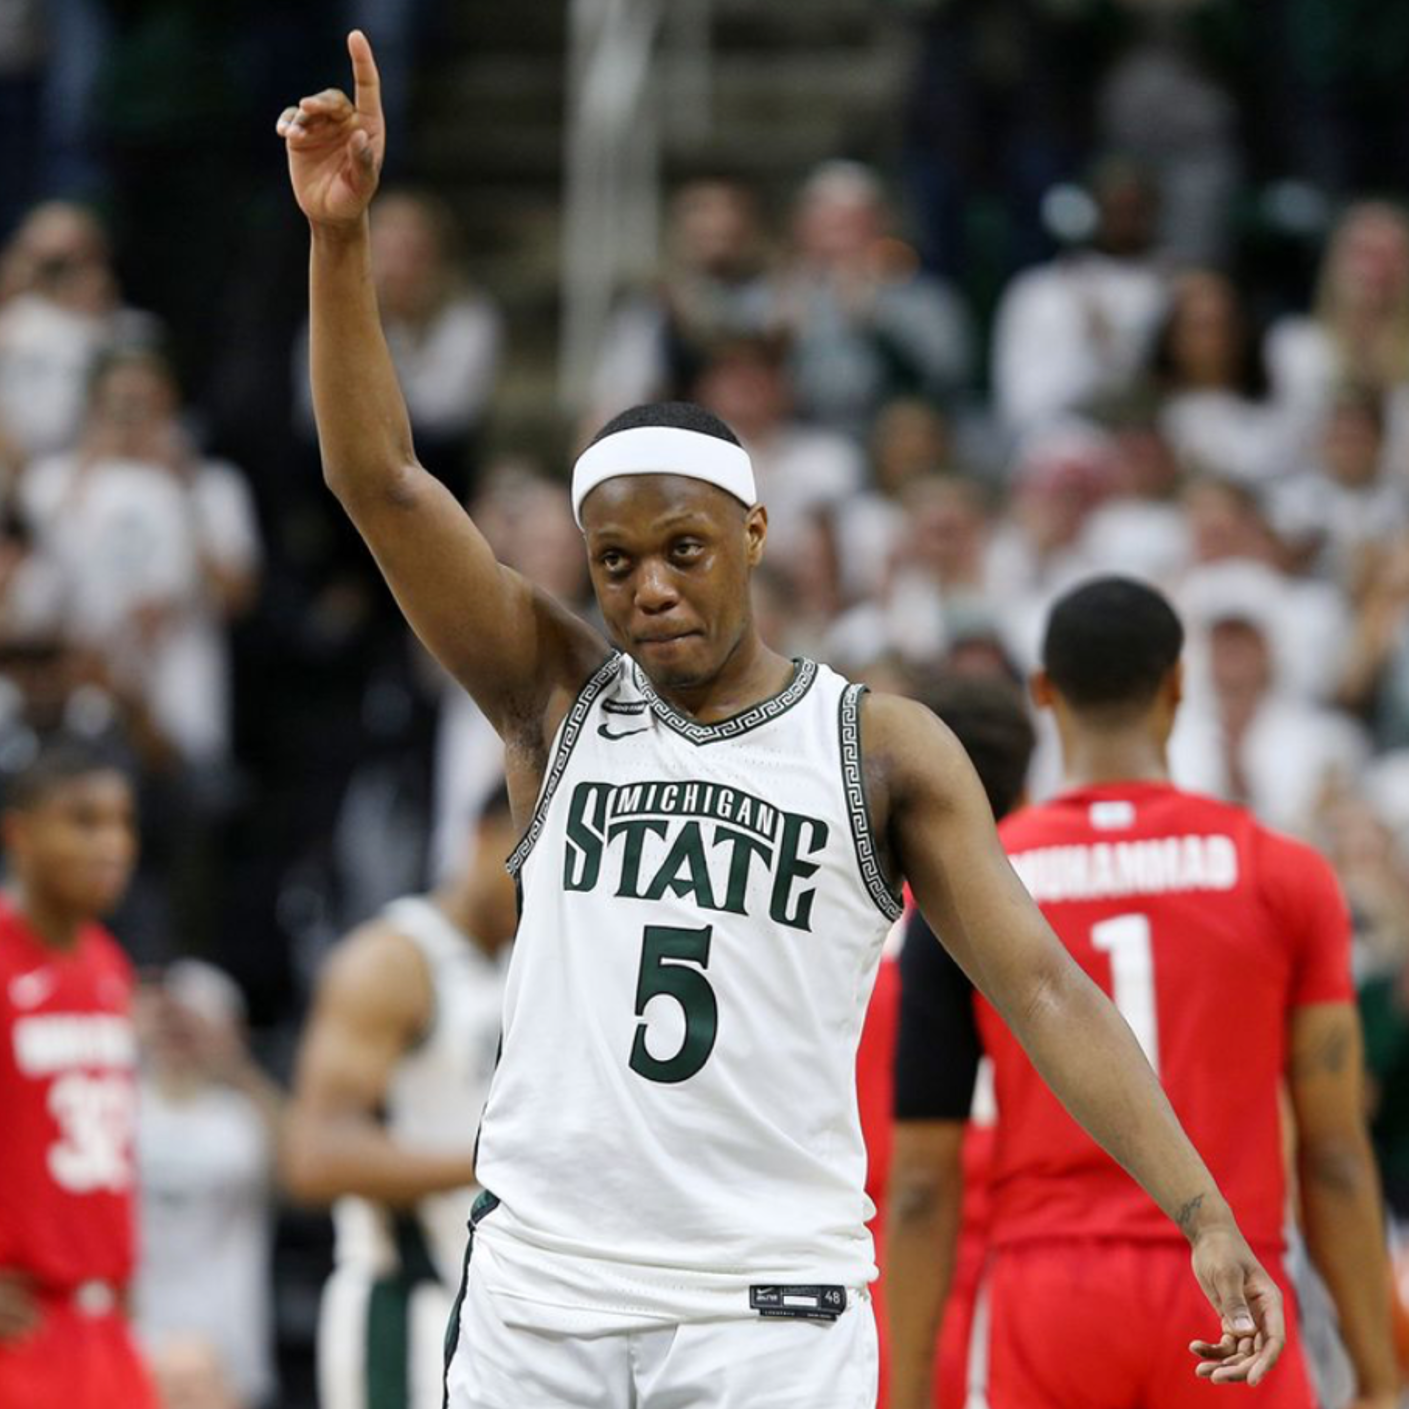 Cassius Winston at a Michigan State University basketball game